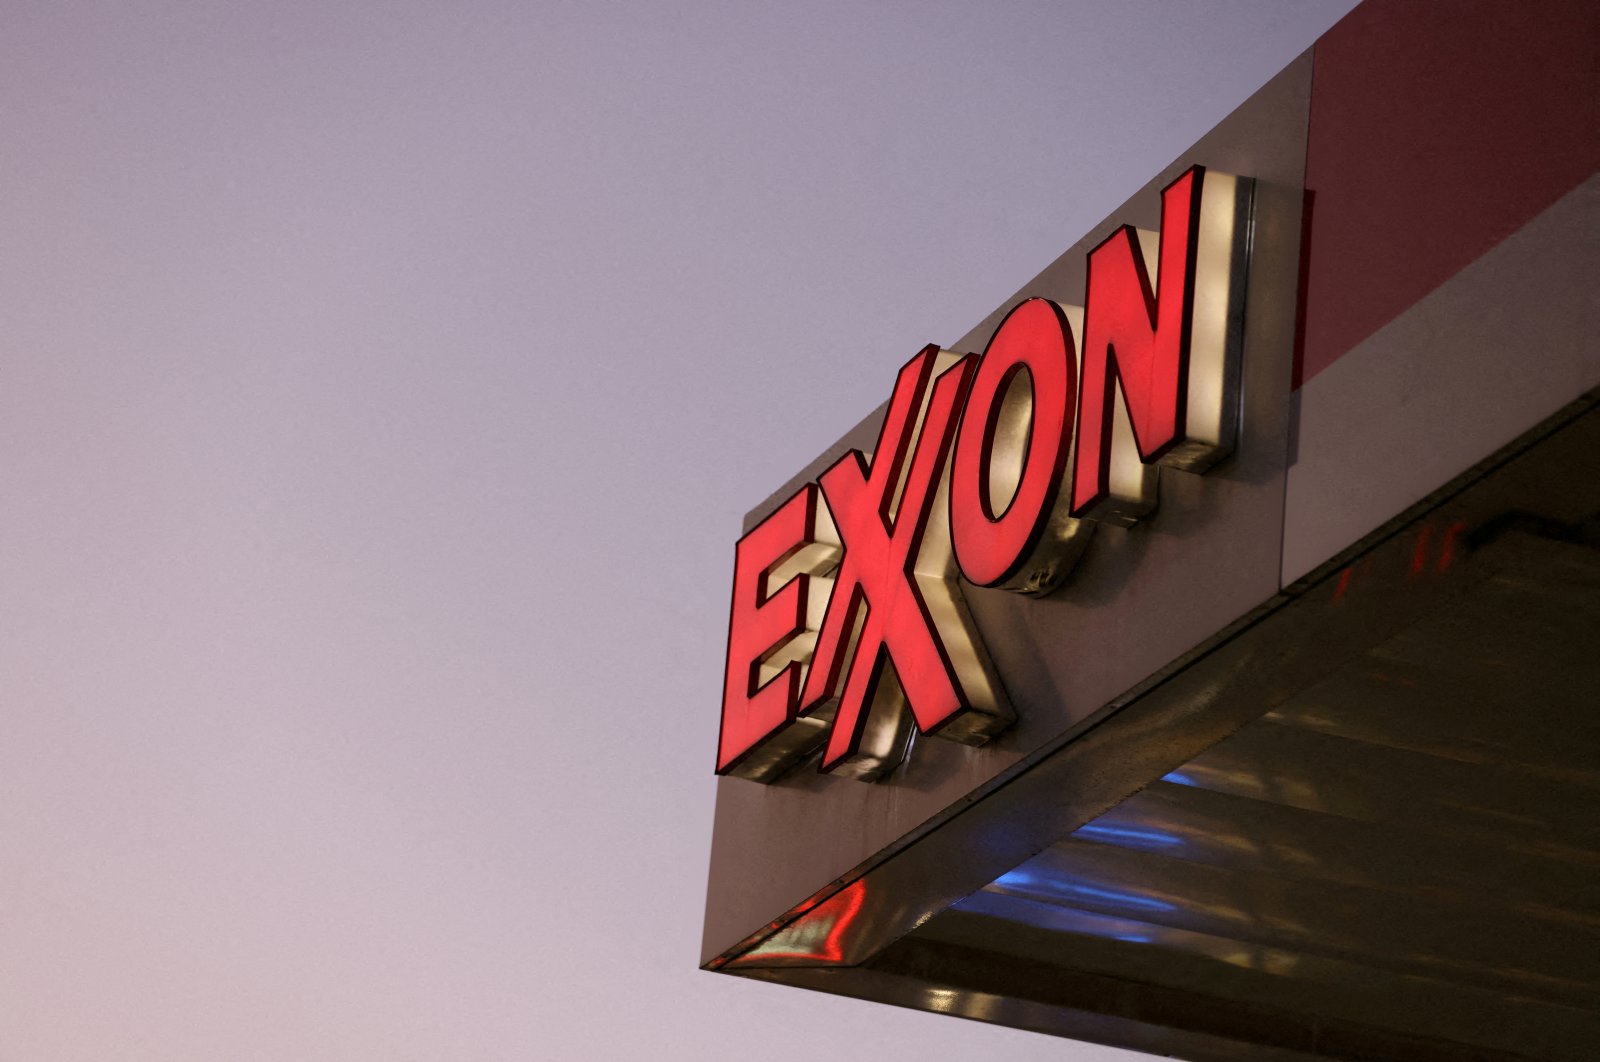 Signage is seen at an Exxon gas station in Brooklyn, New York City, U.S., Nov. 23, 2021. (REUTERS File Photo)